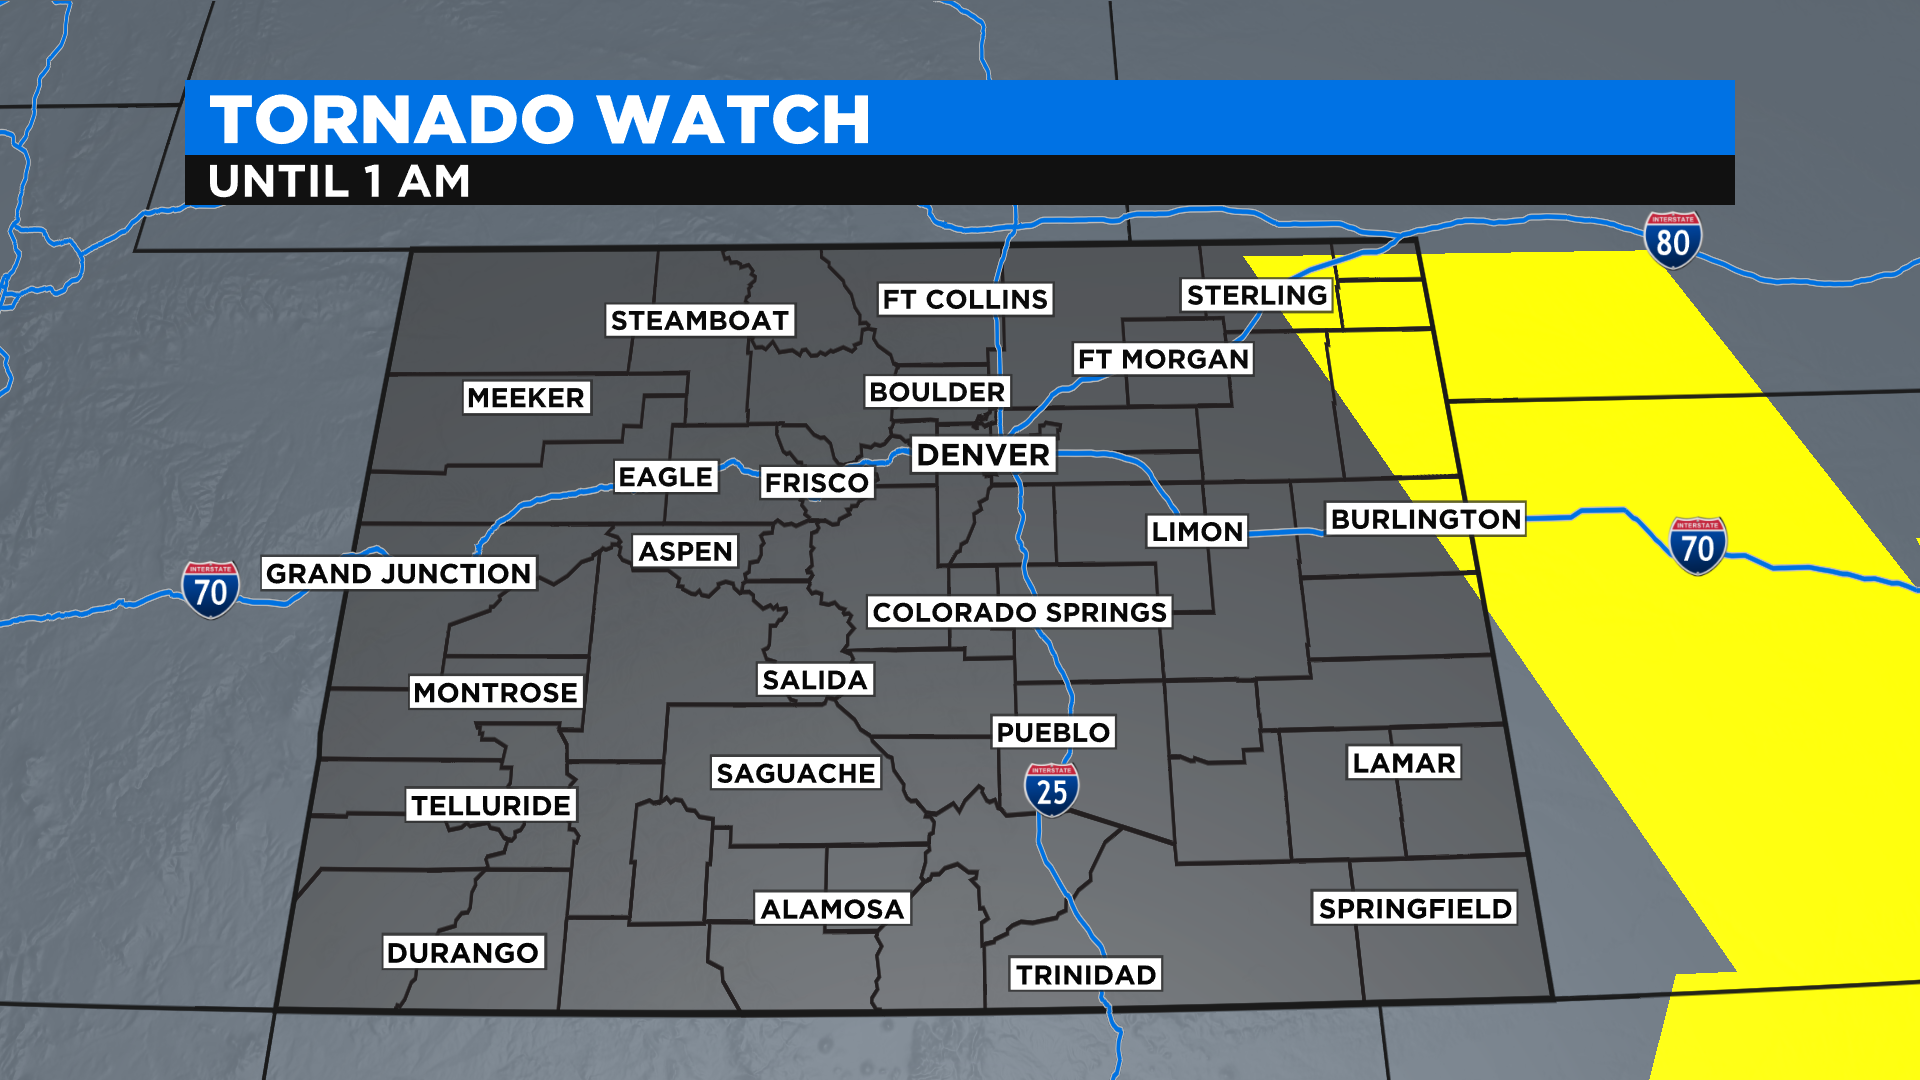 TORNADO WATCH coming for Quad Cities | OurQuadCities